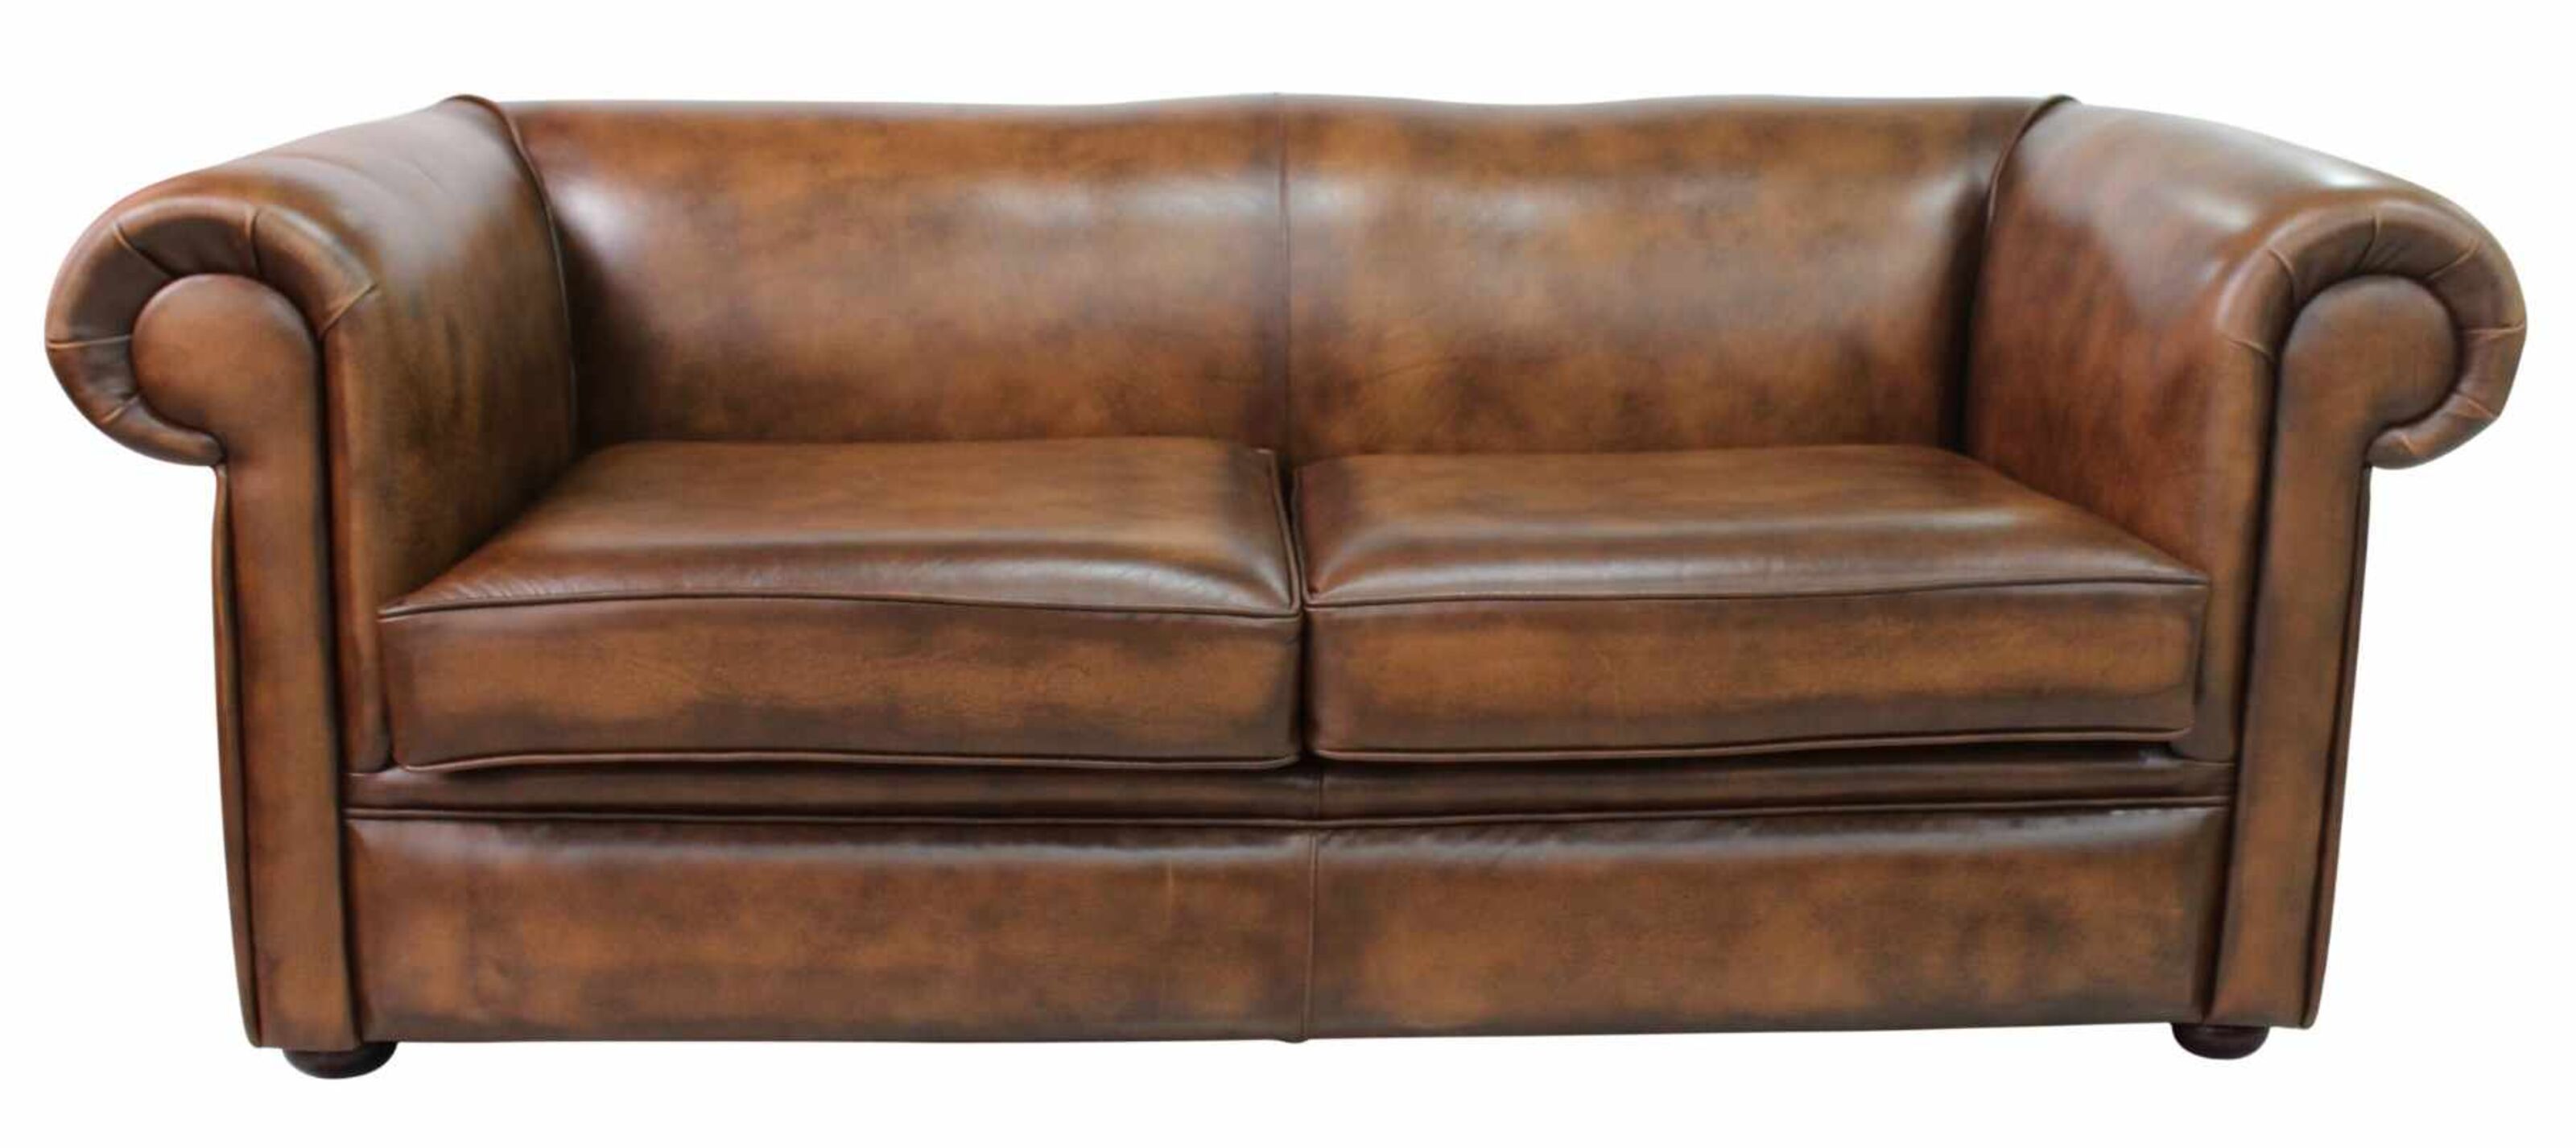 The Chesterfield More Than Just a Sofa  %Post Title